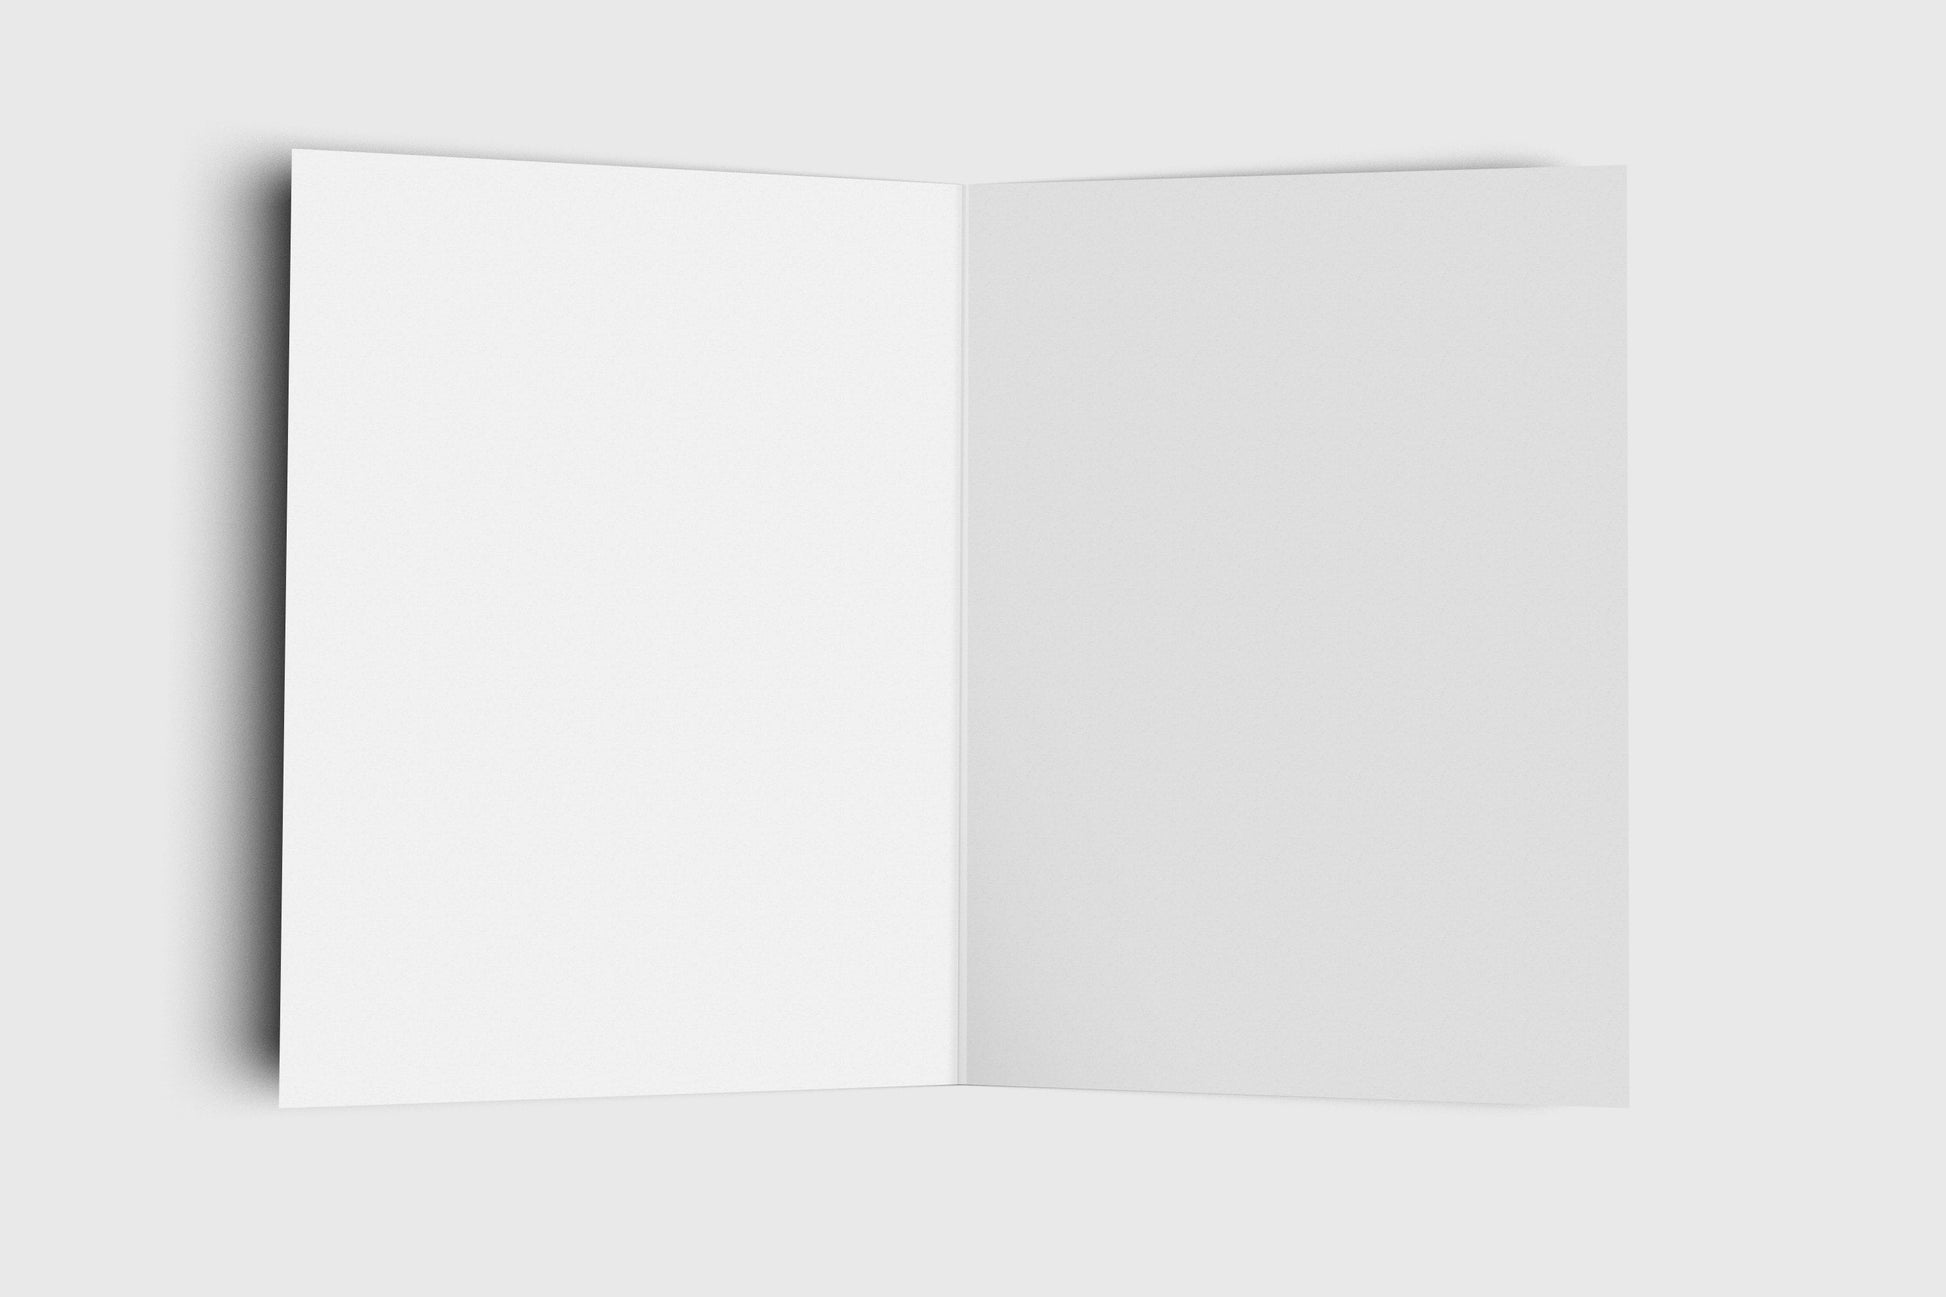 Dope Card - Hype Greeting Card - Congrats - Excited - Happy Birthday - Proud of You - Celebrate - Minimalist Greeting Card - Blank Inside